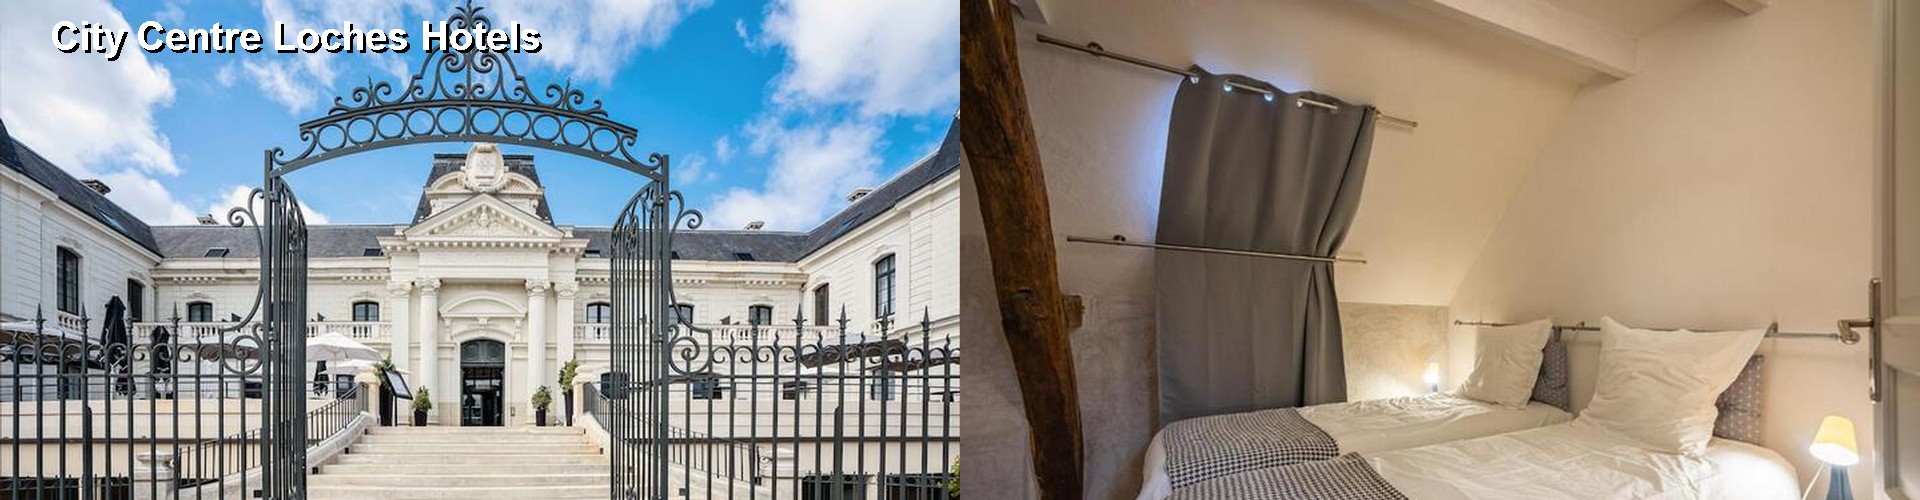 5 Best Hotels near City Centre Loches